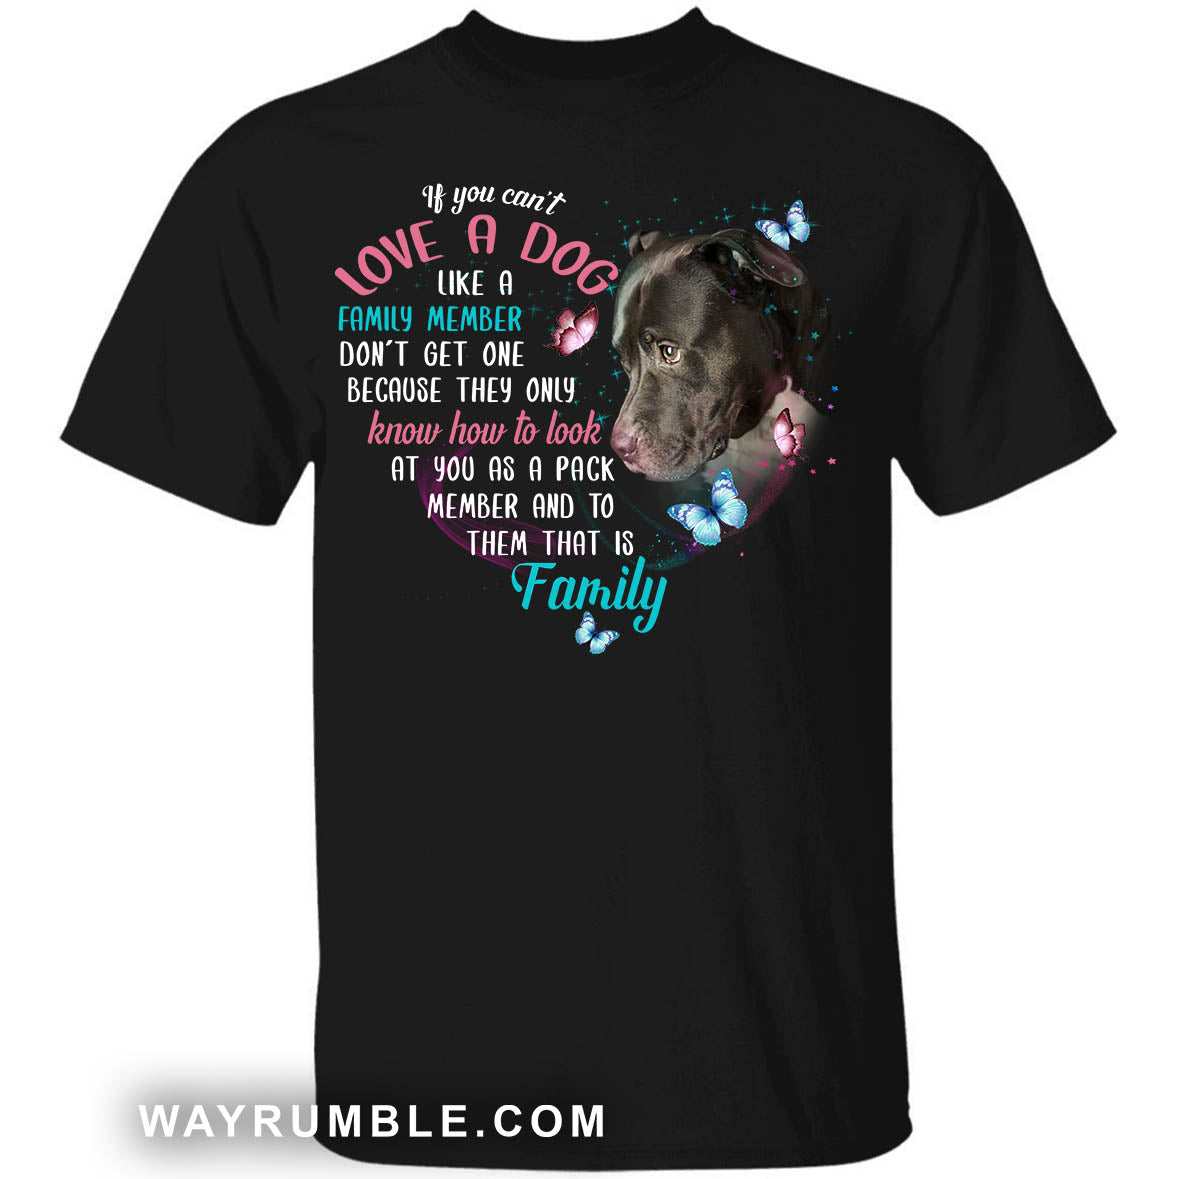 To them you are family - Pit Bull Apparel